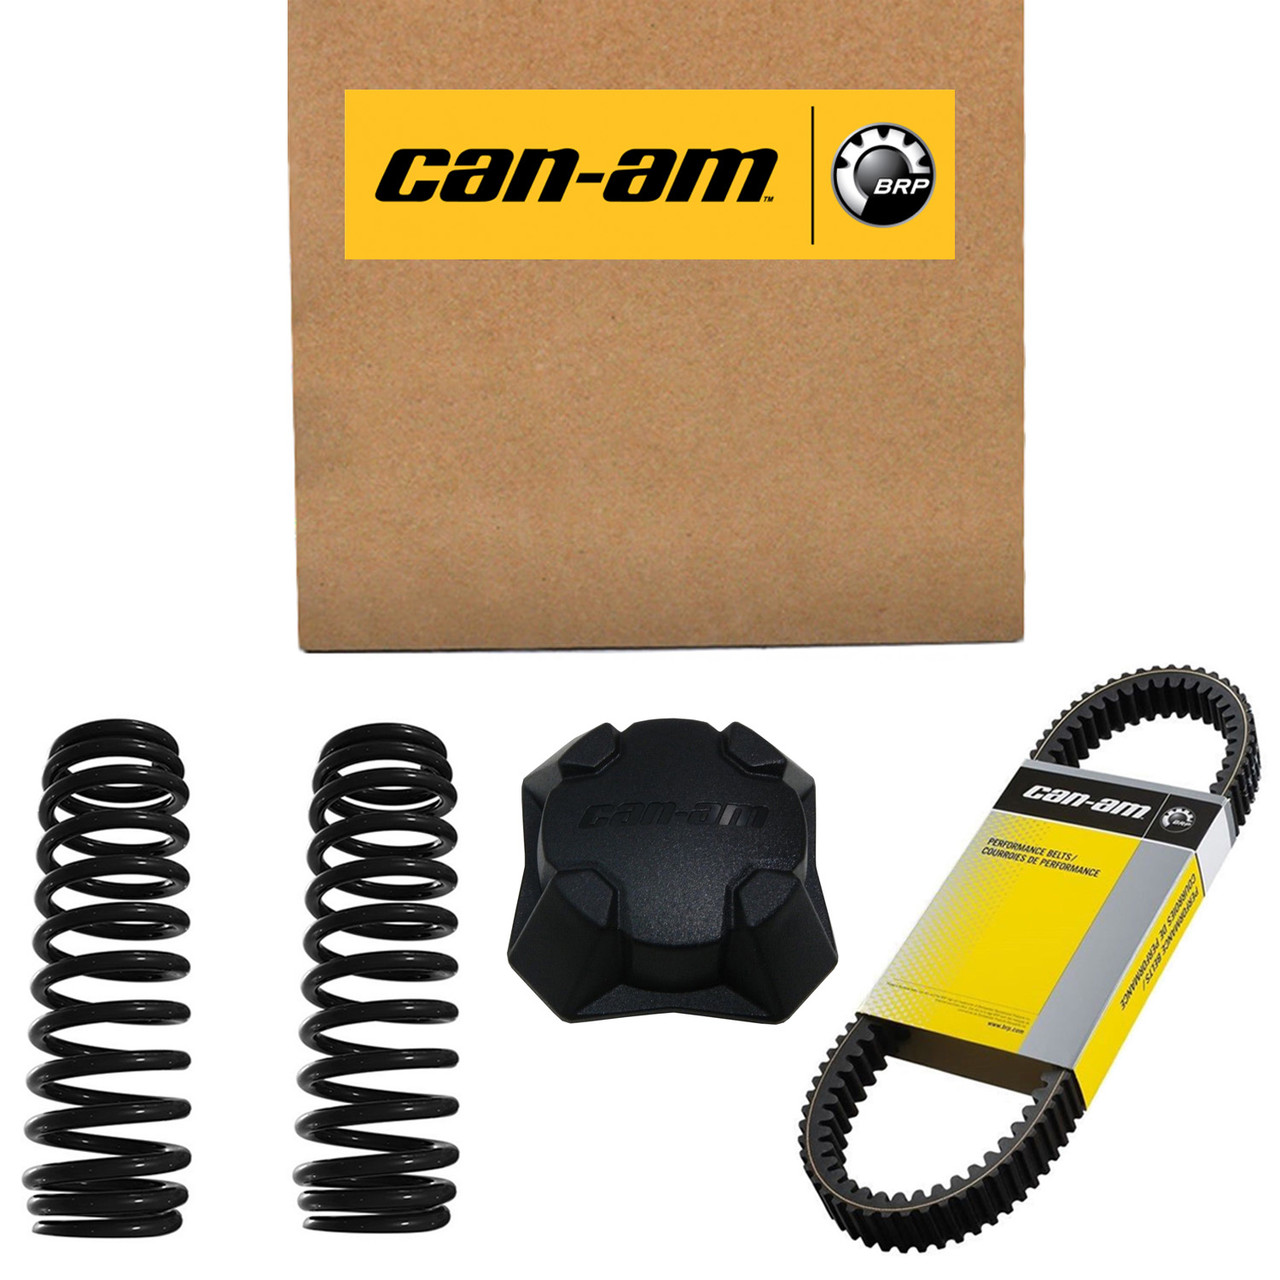 Can-Am New OEM Multifunction Gauge_Full Size Mono, 710006723